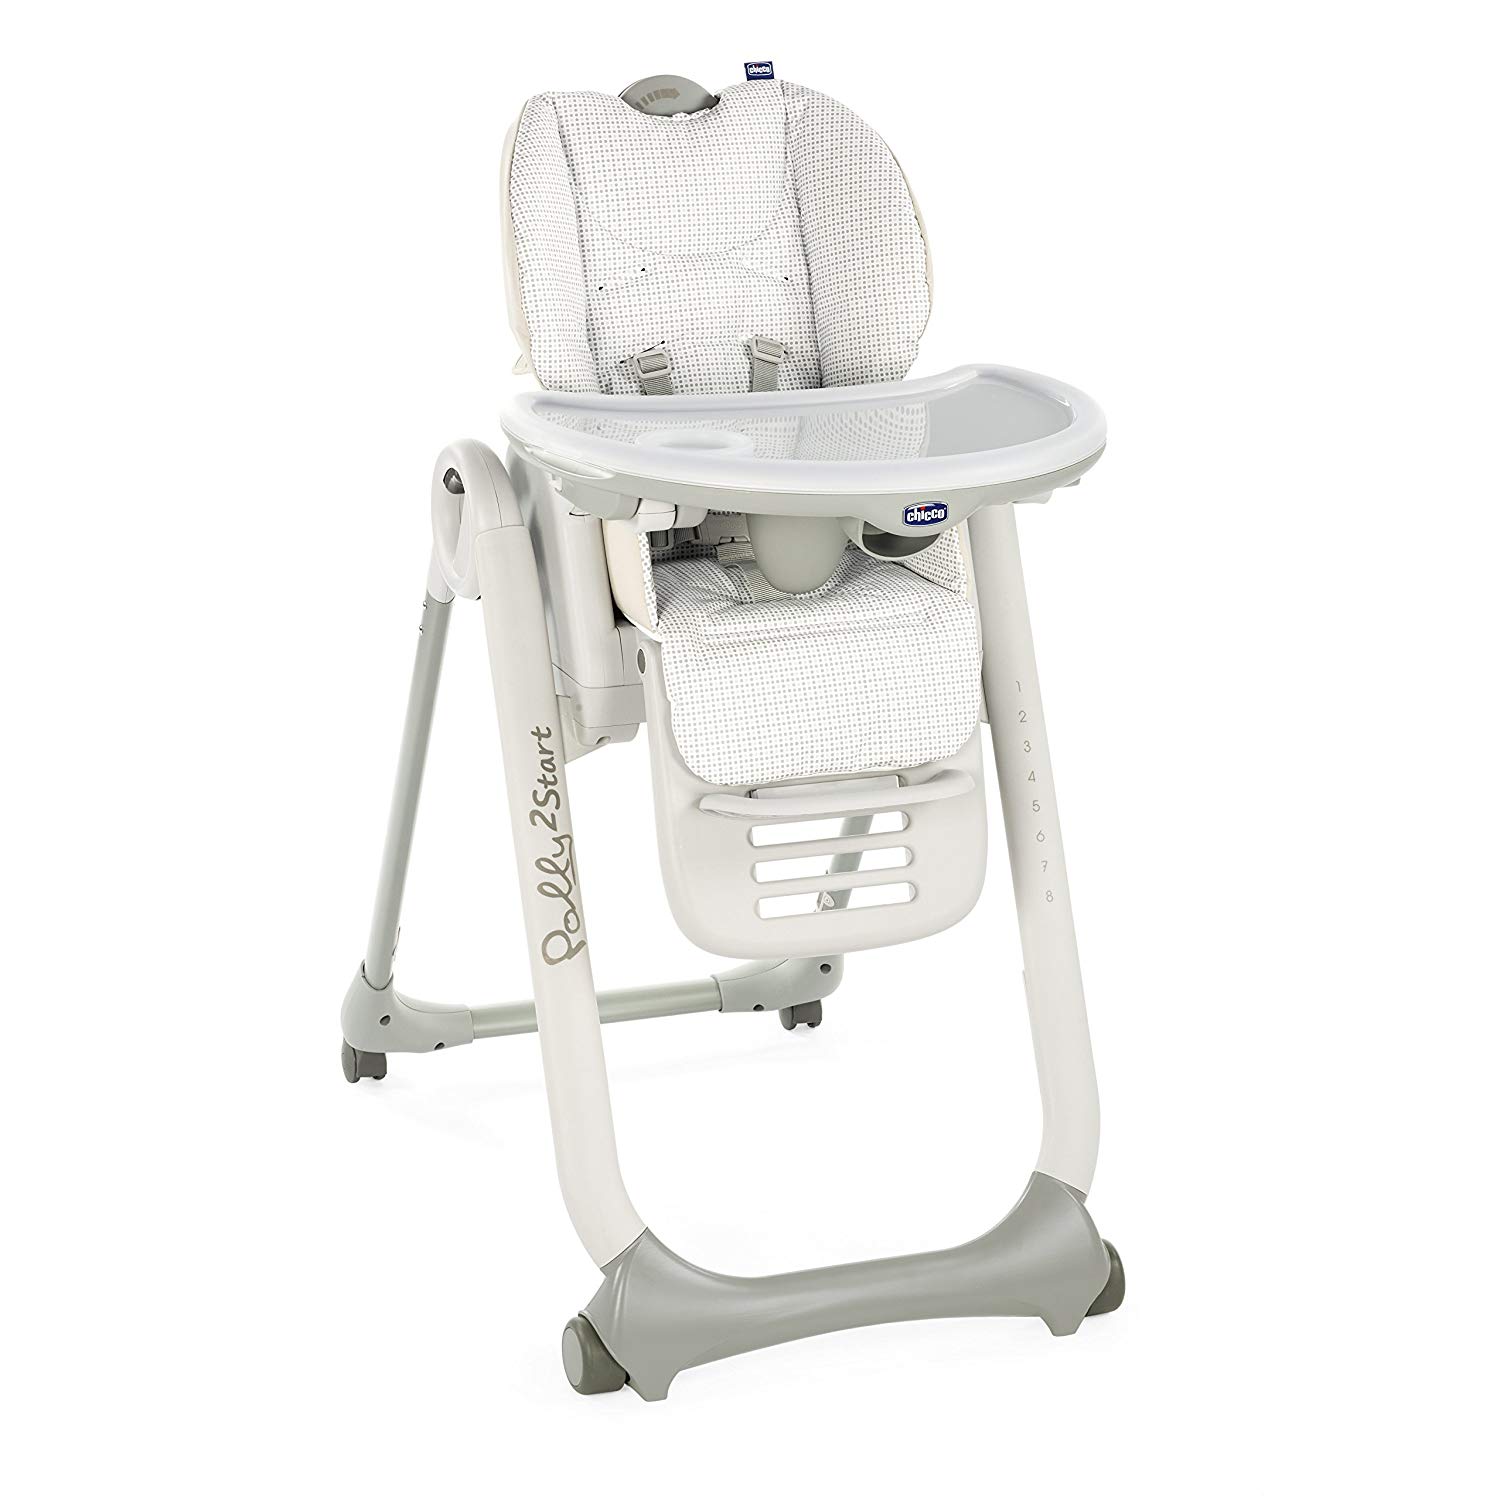 Chicco Polly 2 Start 00079205960000 High Chair